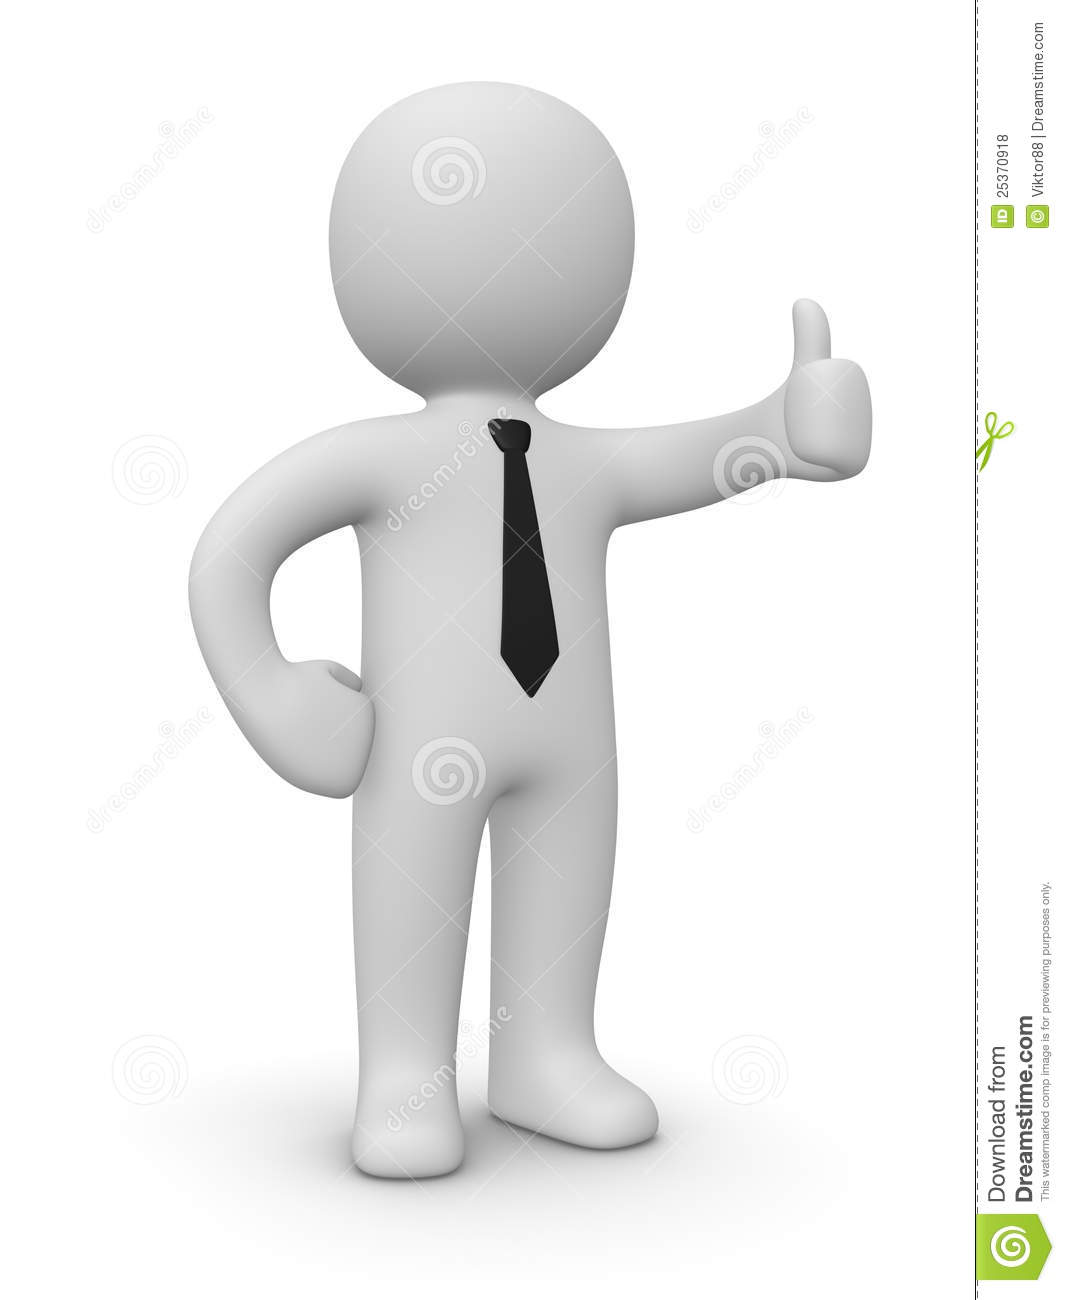 Thumbs Up Sign Clipart Showing Thumbs Up Sign